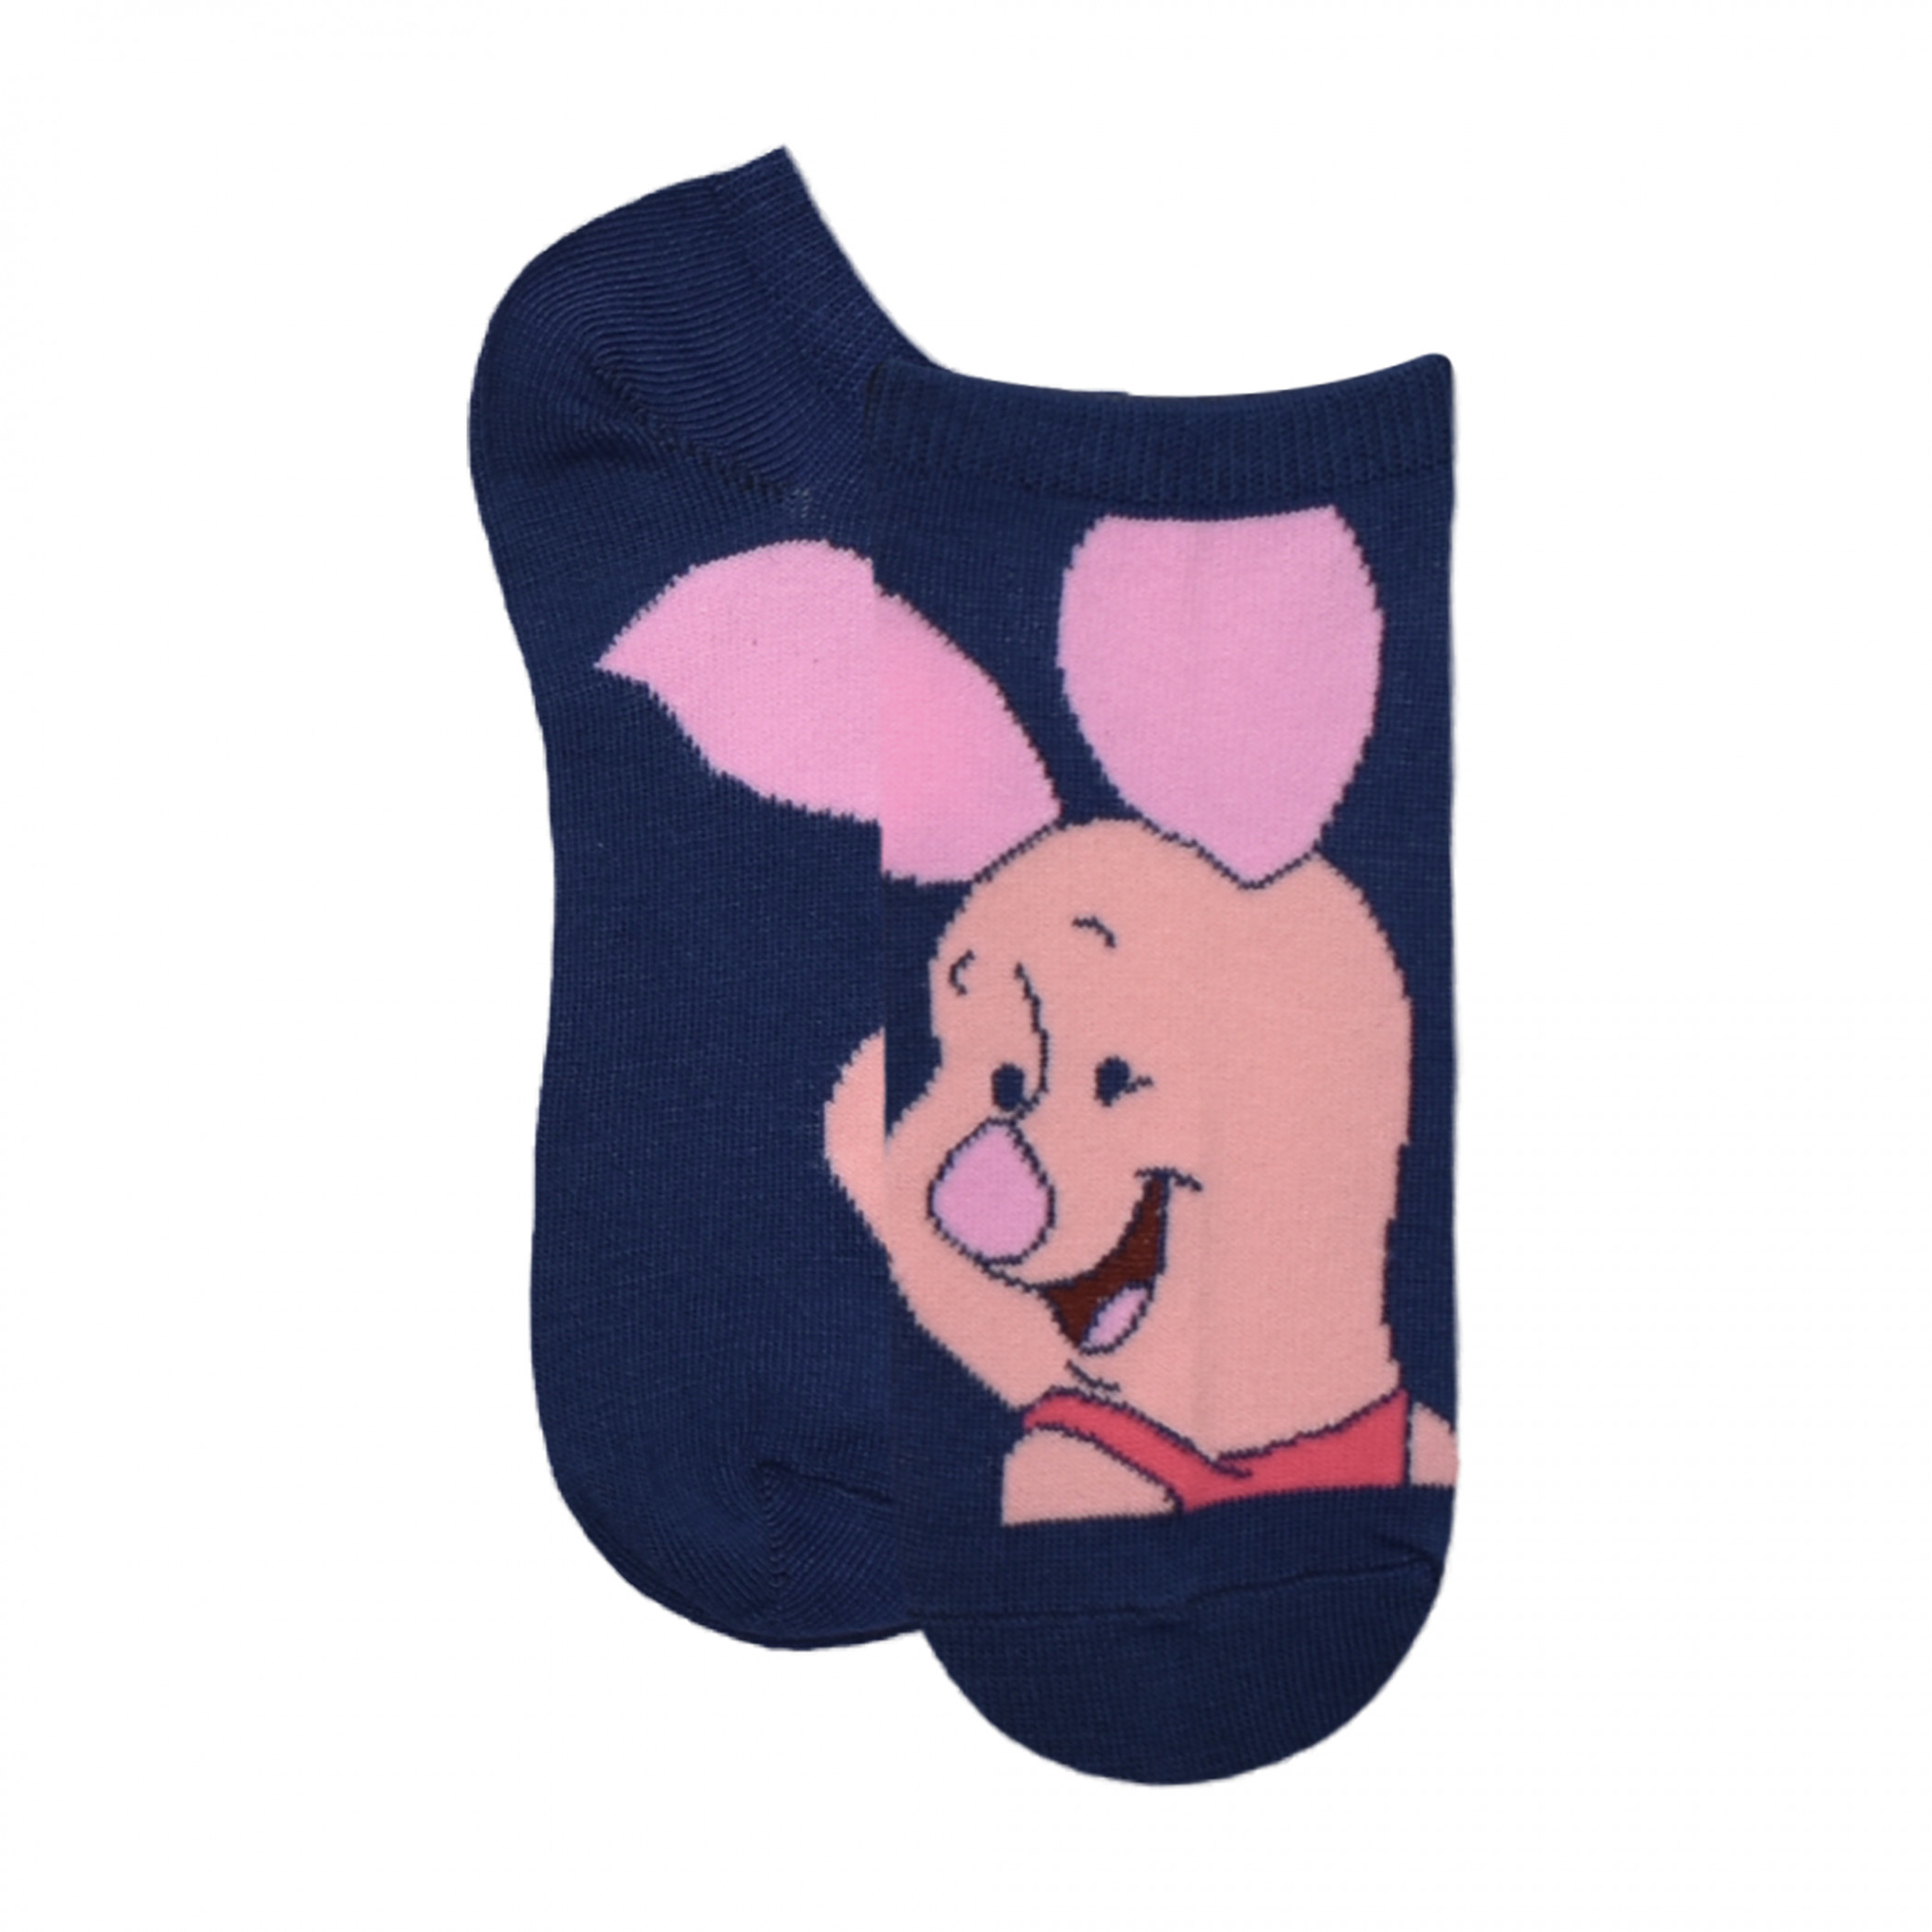 Winnie the Pooh and Friends 9-Pair No-Show Socks